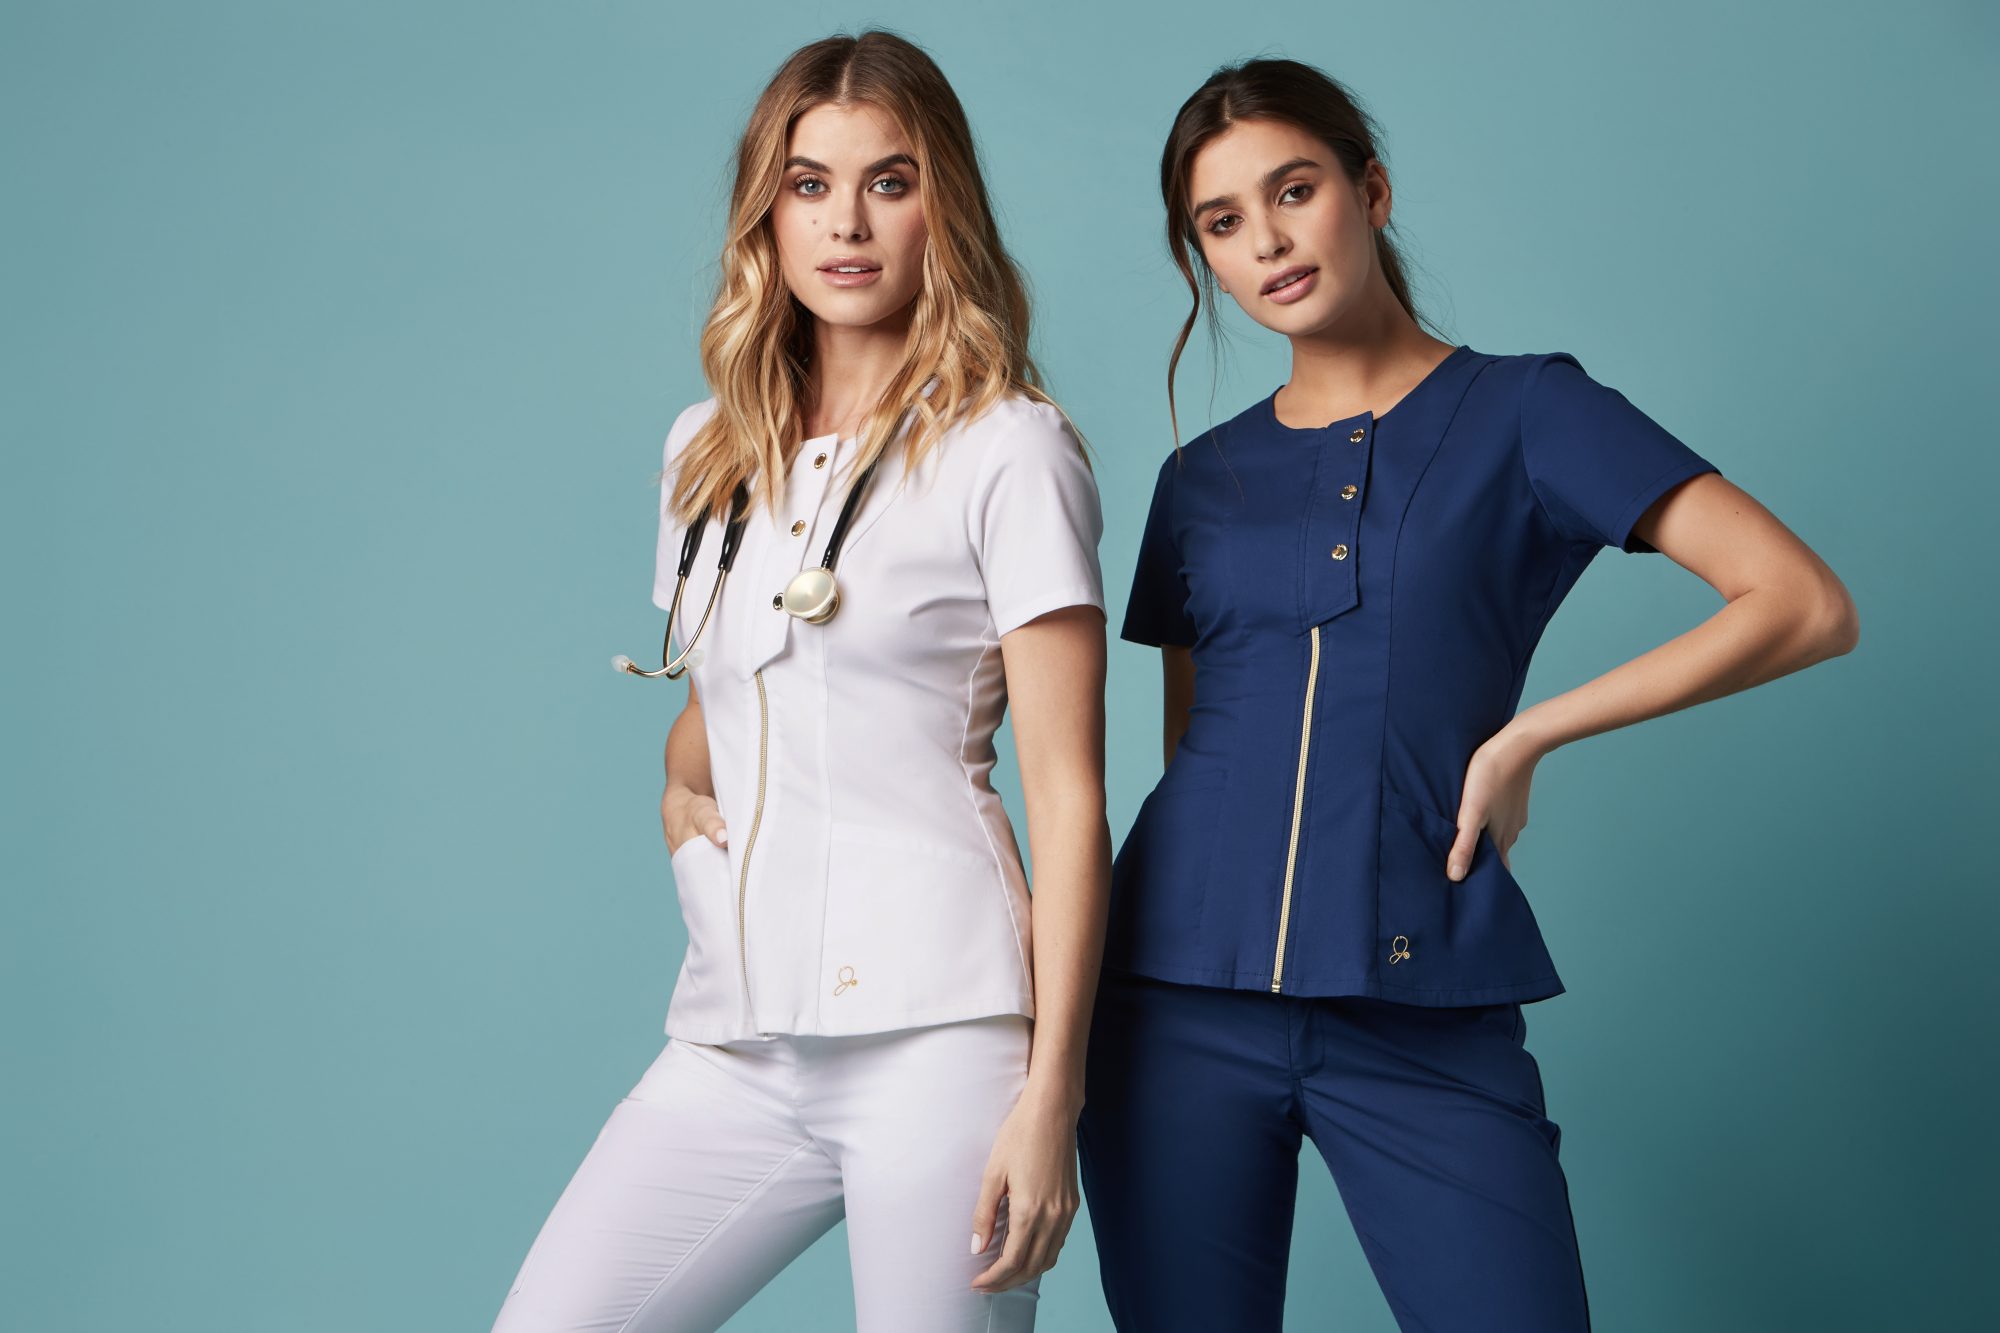 This Company Is Making Stylish Scrubs So Doctors And Nurses Can Express Themselves While On The